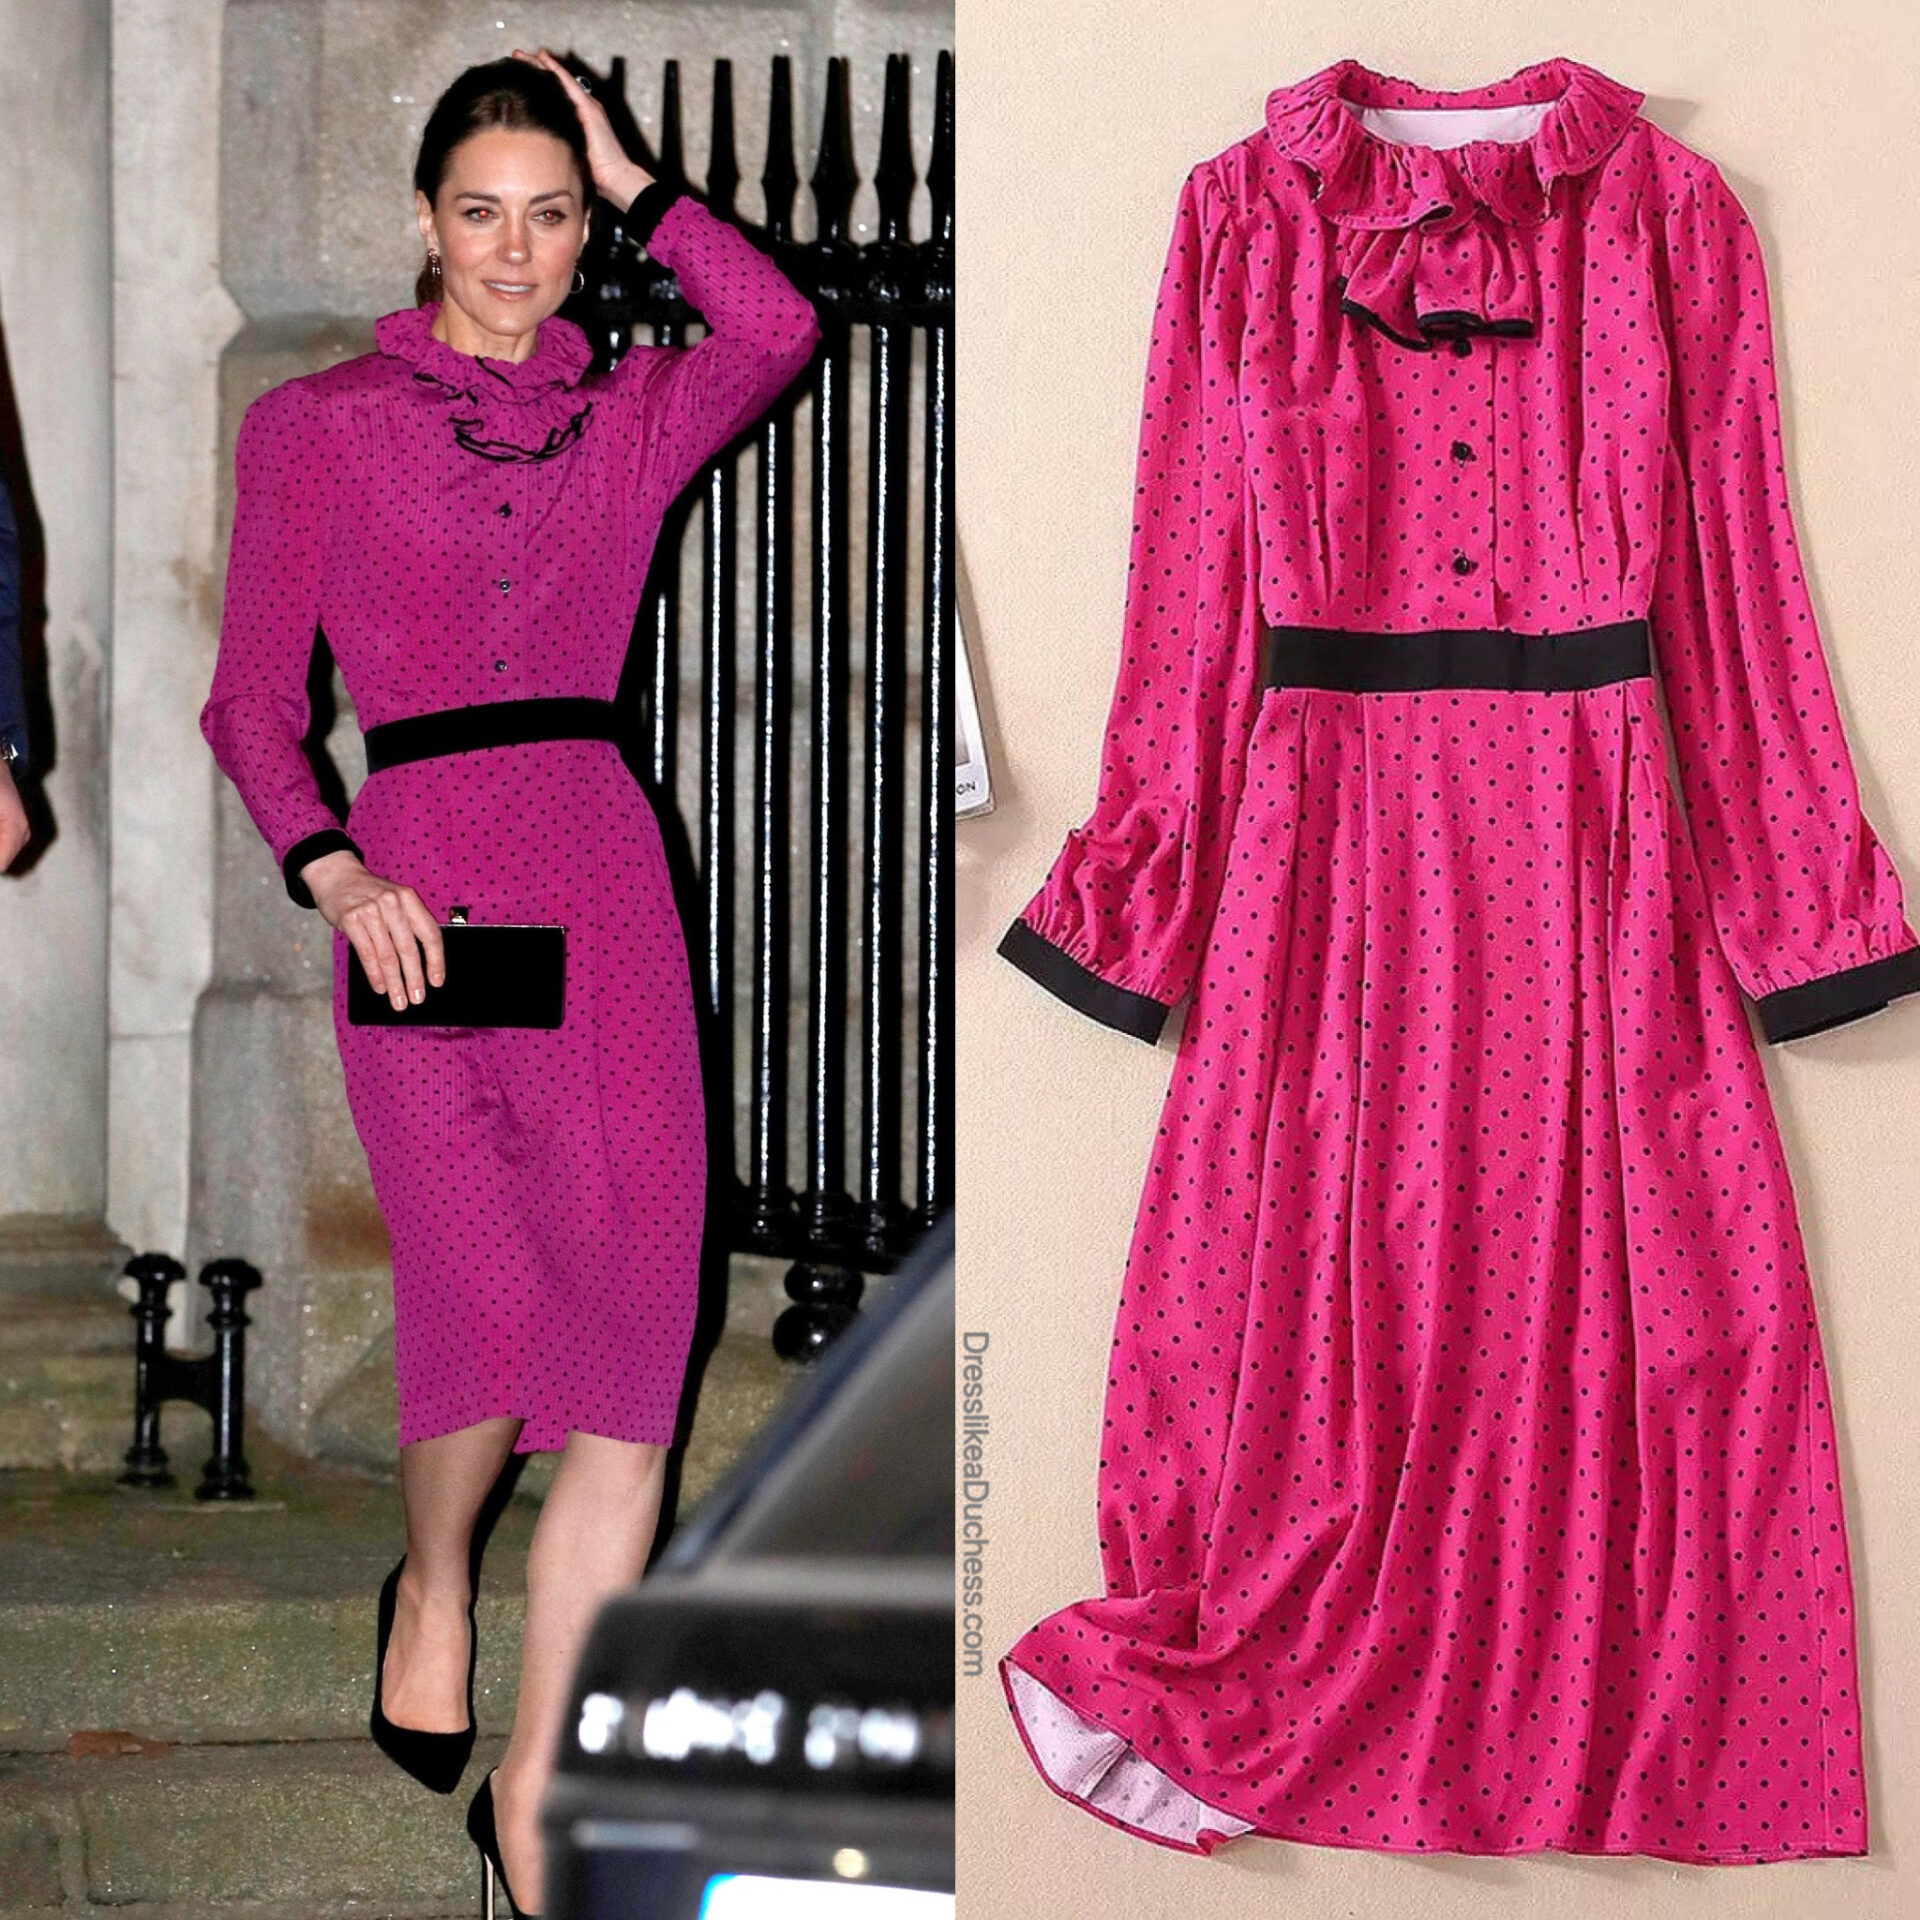 The Best Kate Middleton Replikate Fashions Available on Etsy - Dress ...